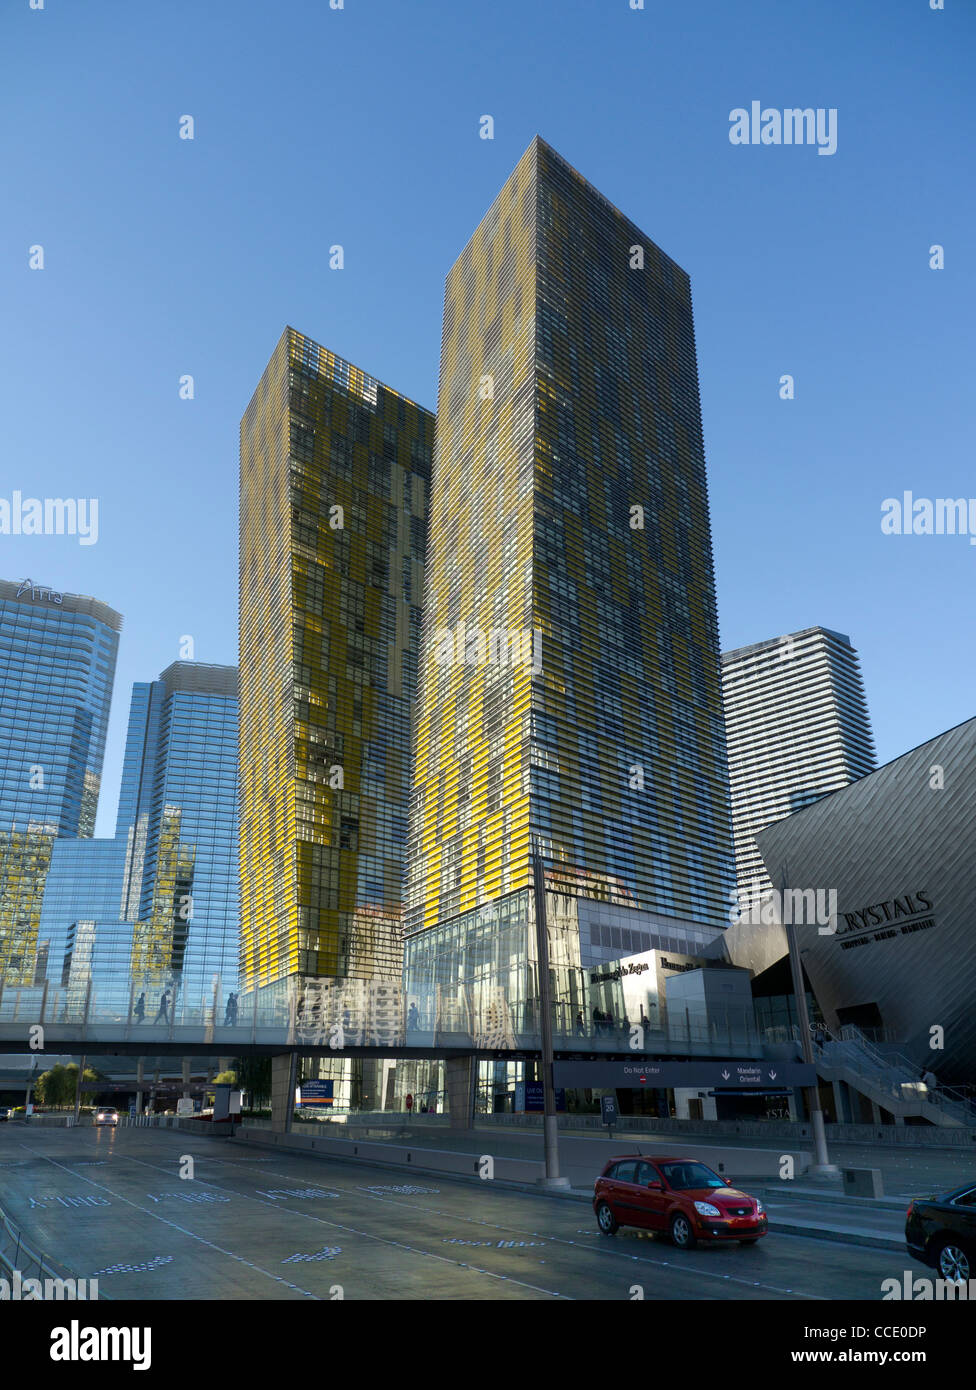 The Veer Towers at the City Center development are cleverly designed to look as if they are leaning over. Stock Photo